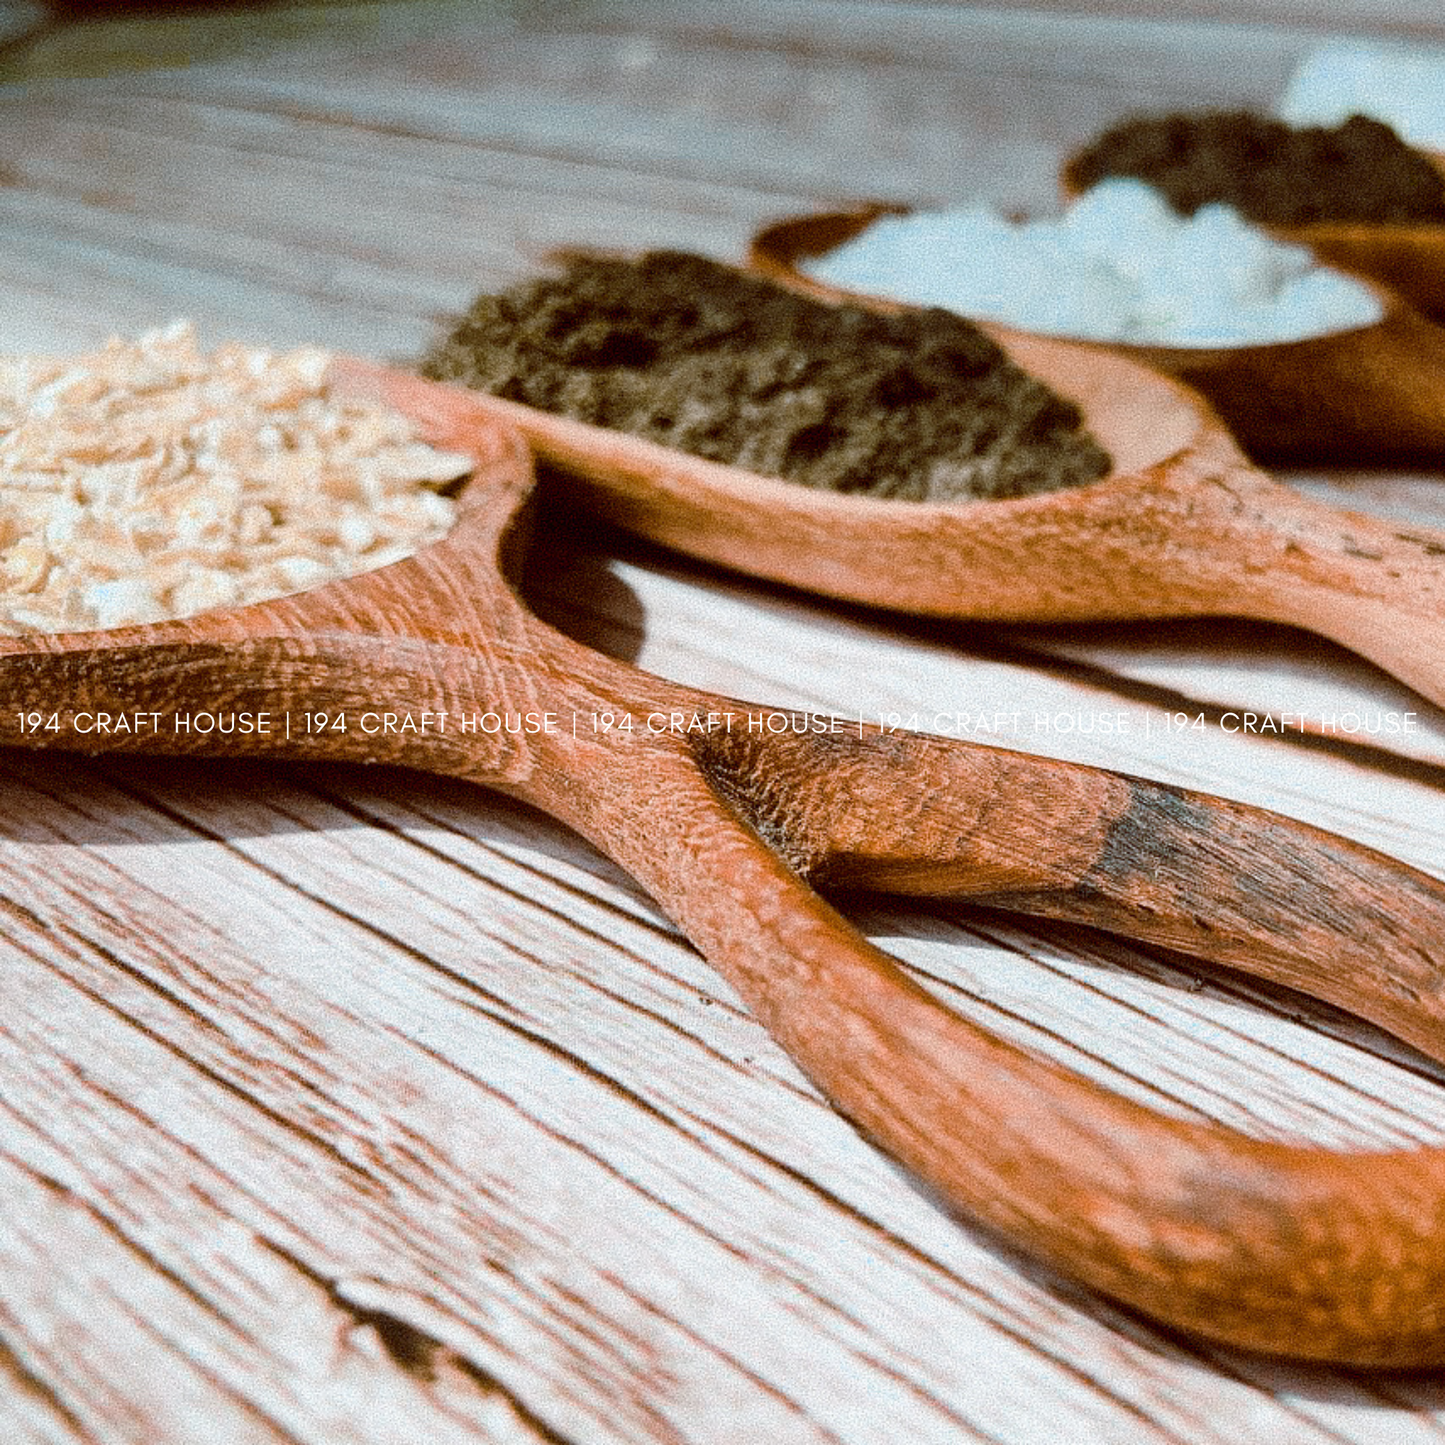 Handcrafted Small Wooden Tea Spoon Measuring Spoon